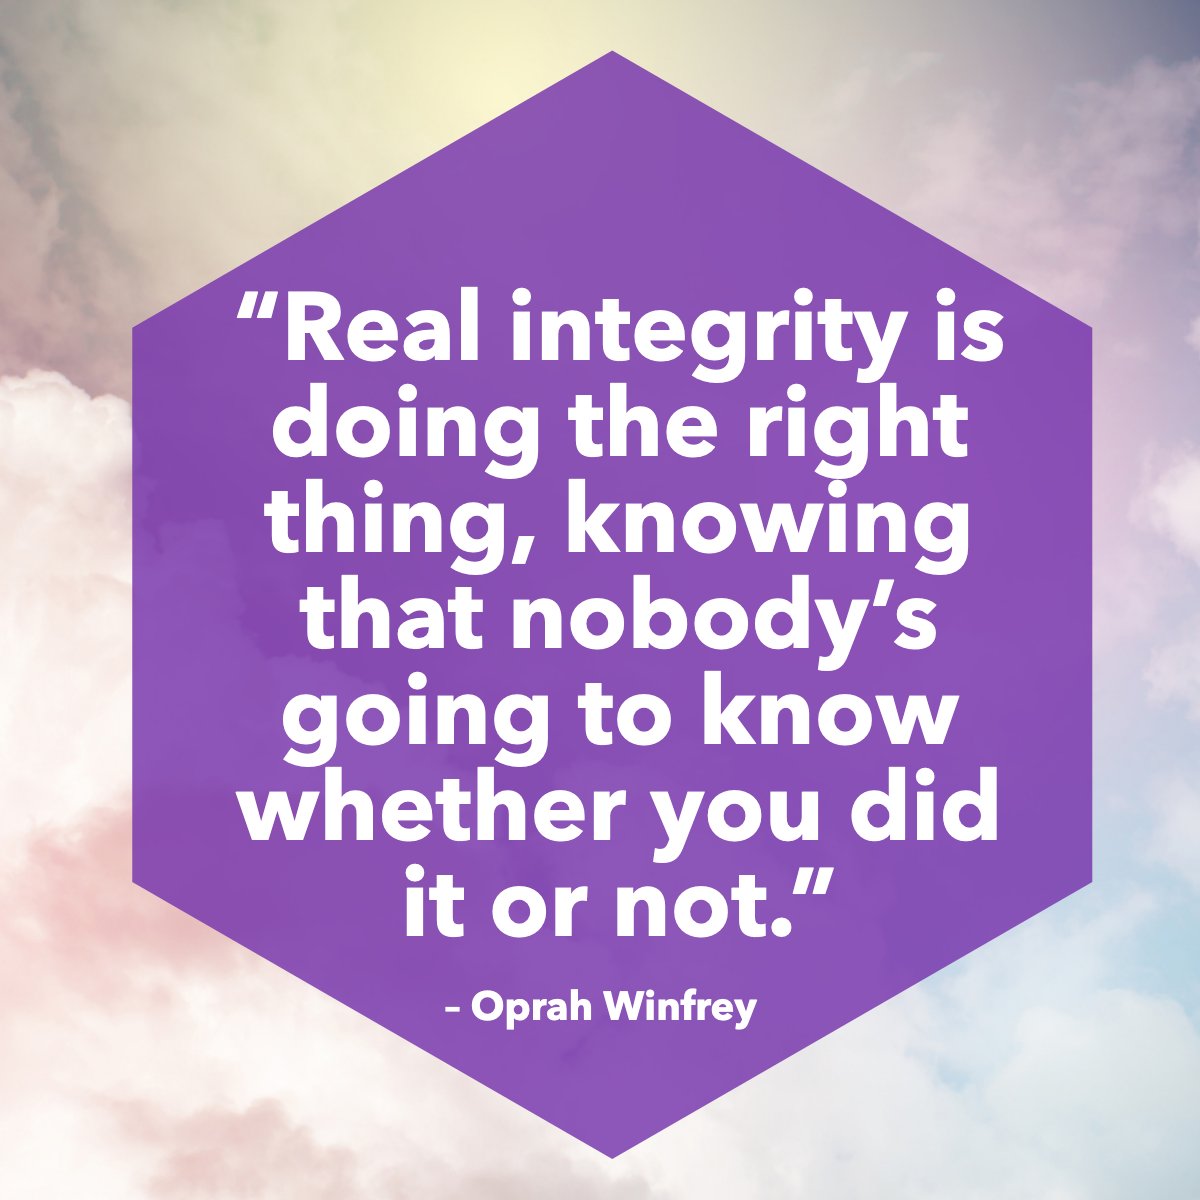 Integrity is a choice we make, and it's a choice we must keep making, every moment of our lives. 🙌✨

#teamintegrity #integritylife #kindness #change
 #RacingRealEstateAgent #BarrettRealEstate #StoneTreeRealEstateTeam #maricopaazrealestate #racingagent